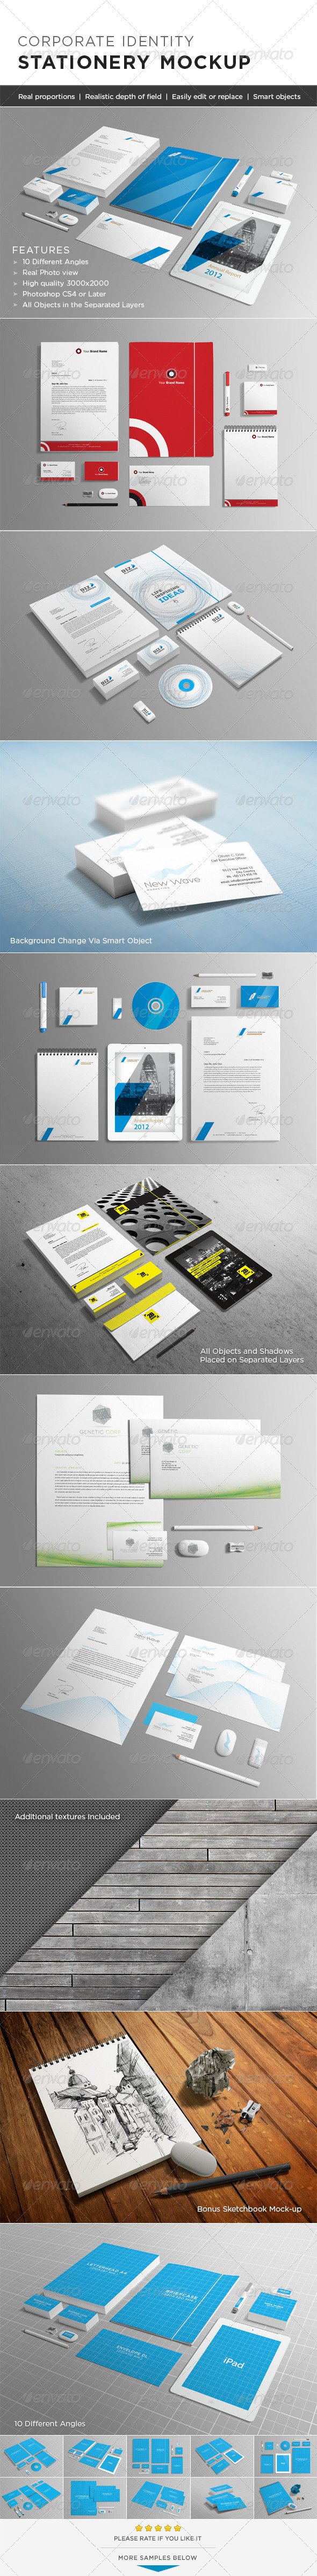 Download Letterhead Graphics Designs Templates From Graphicriver Yellowimages Mockups